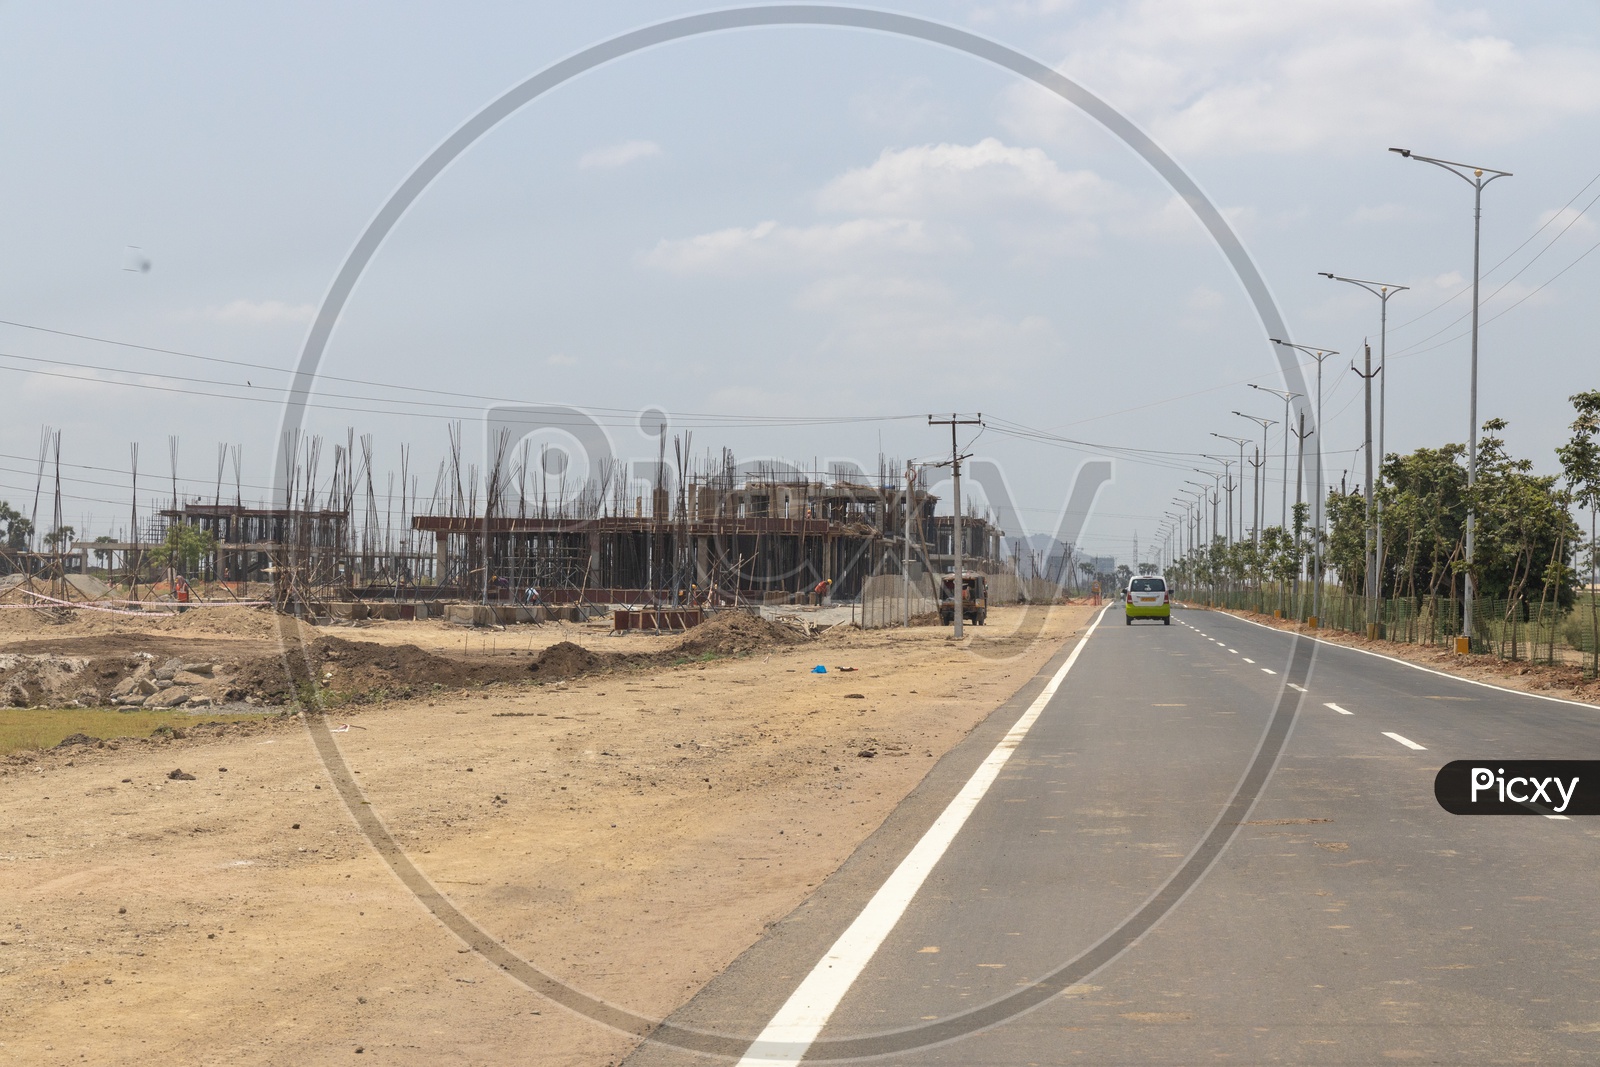 Construction of High Rise Constitutional Buildings alongside the road